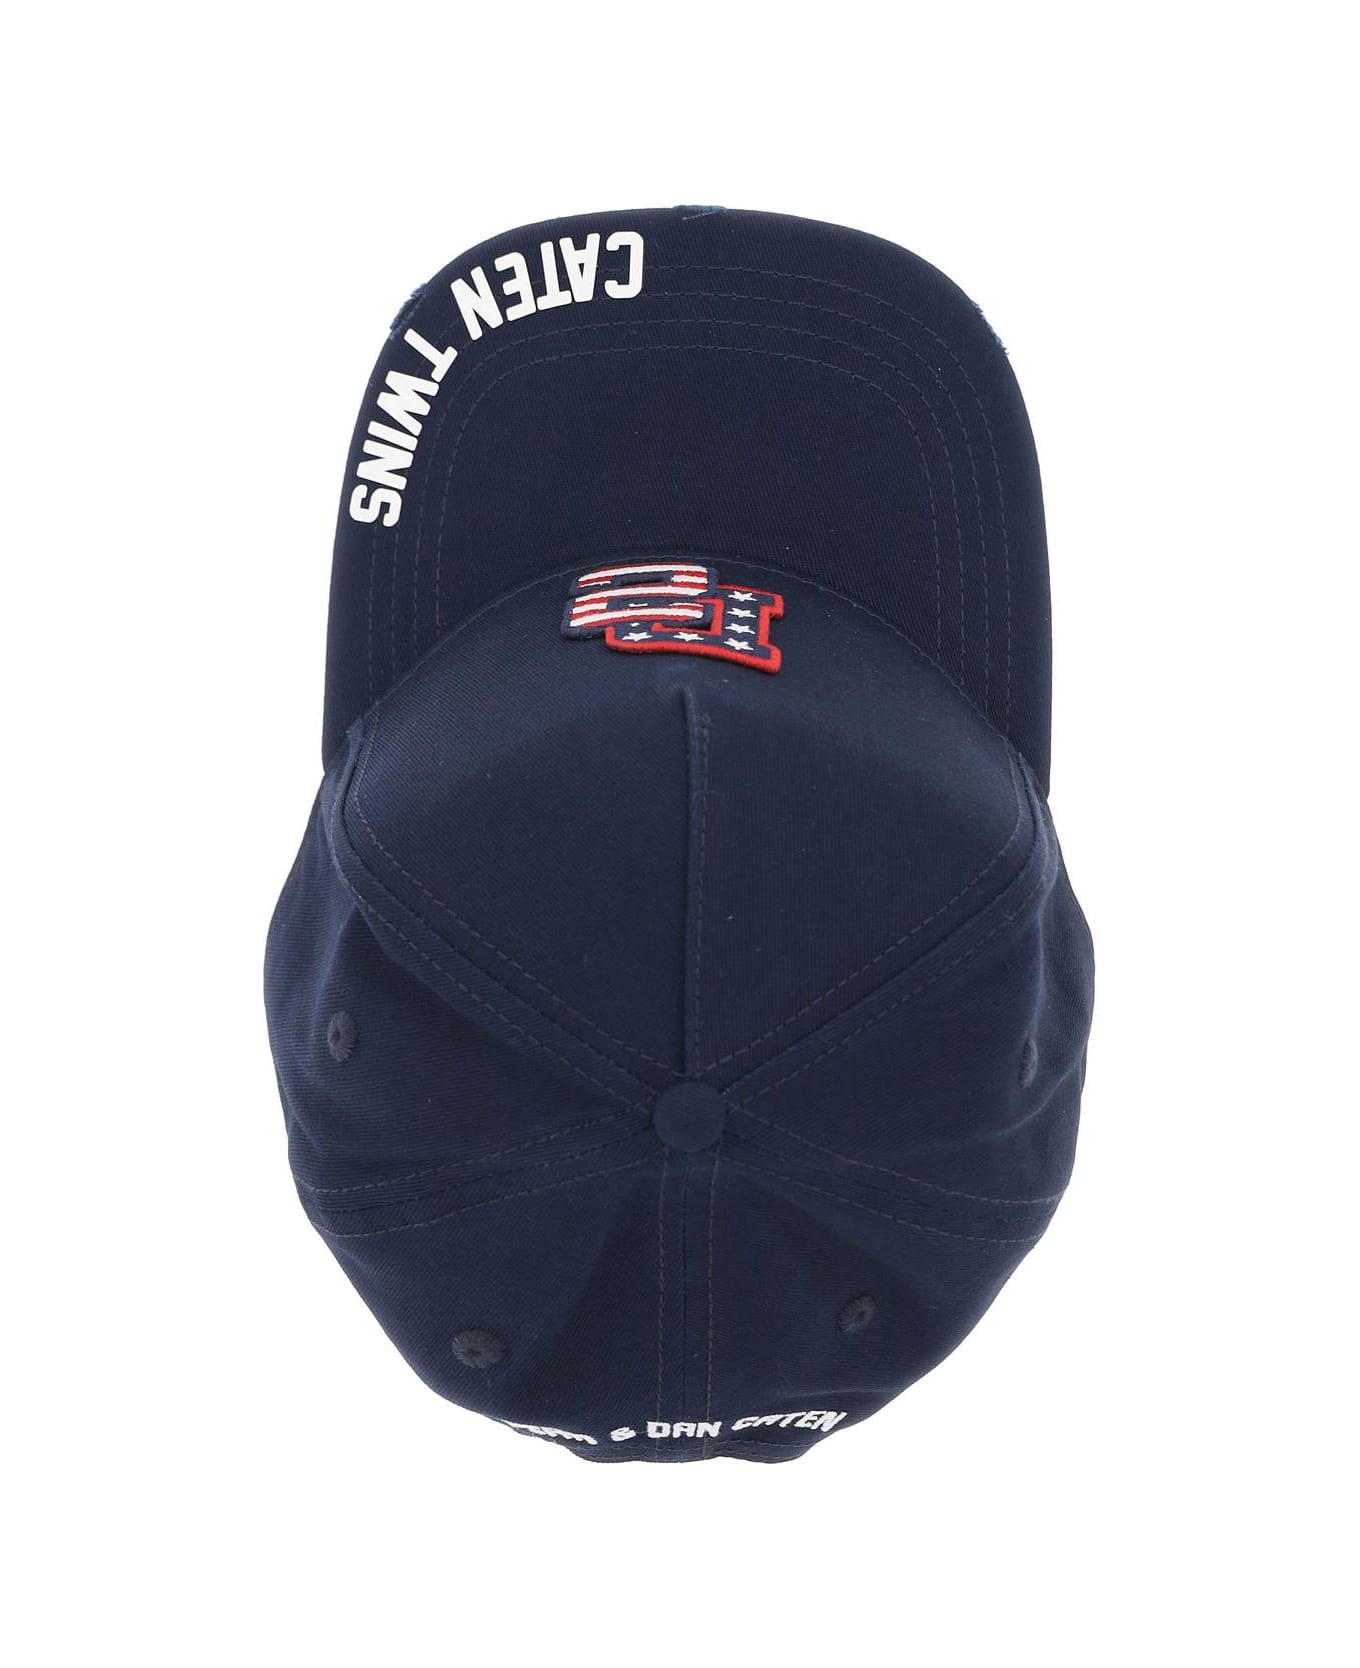 Dsquared2 Baseball Cap With Embroidered Patch - NAVY (Blue)